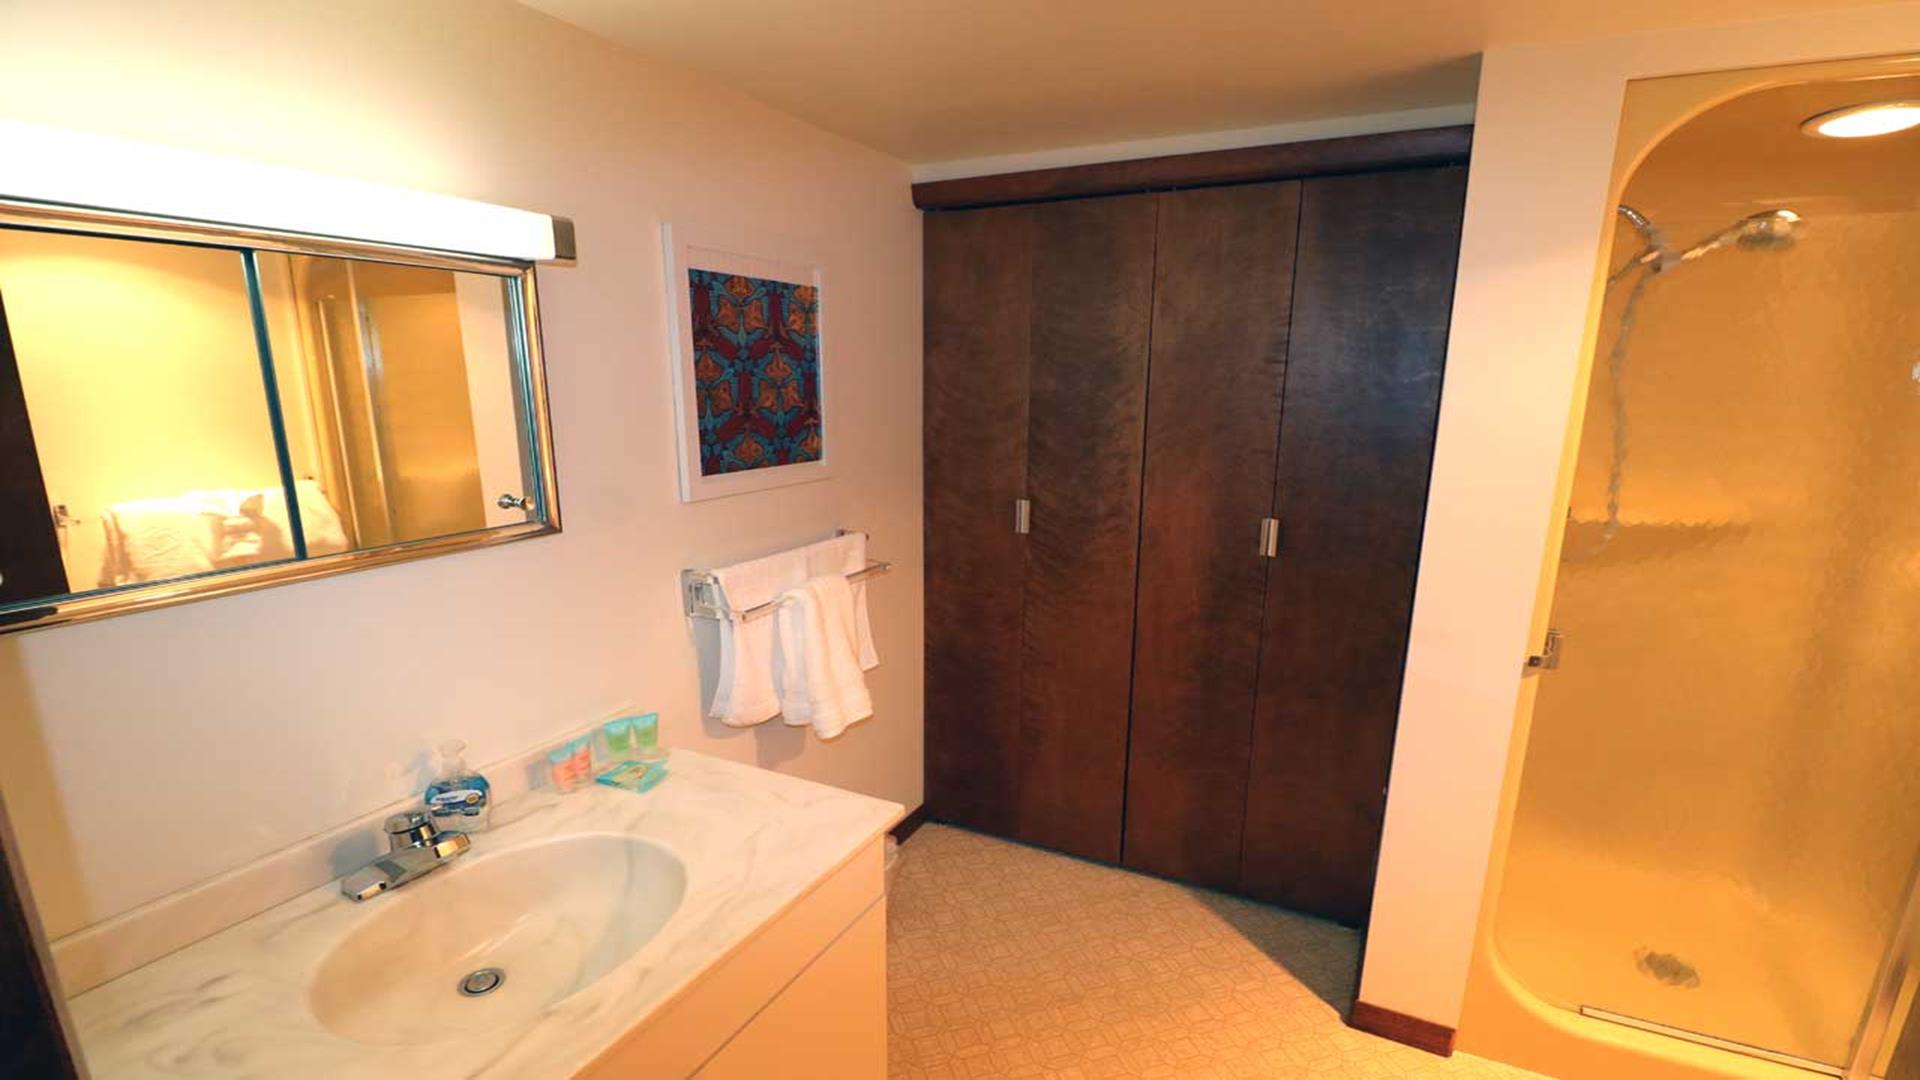 Lower level bathroom with stand up shower